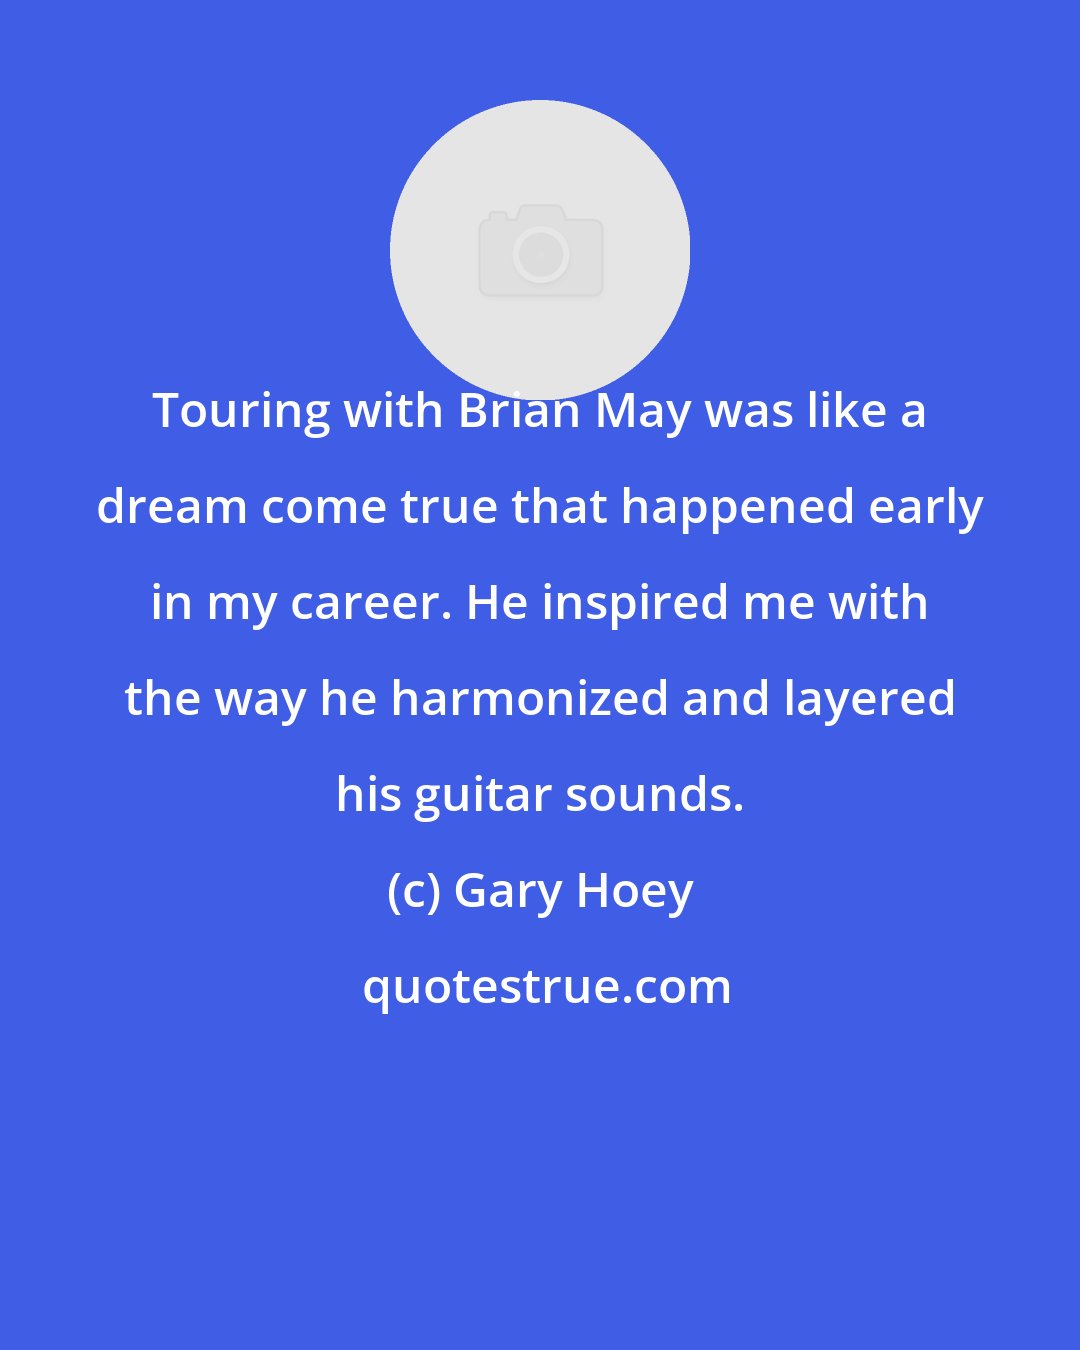 Gary Hoey: Touring with Brian May was like a dream come true that happened early in my career. He inspired me with the way he harmonized and layered his guitar sounds.